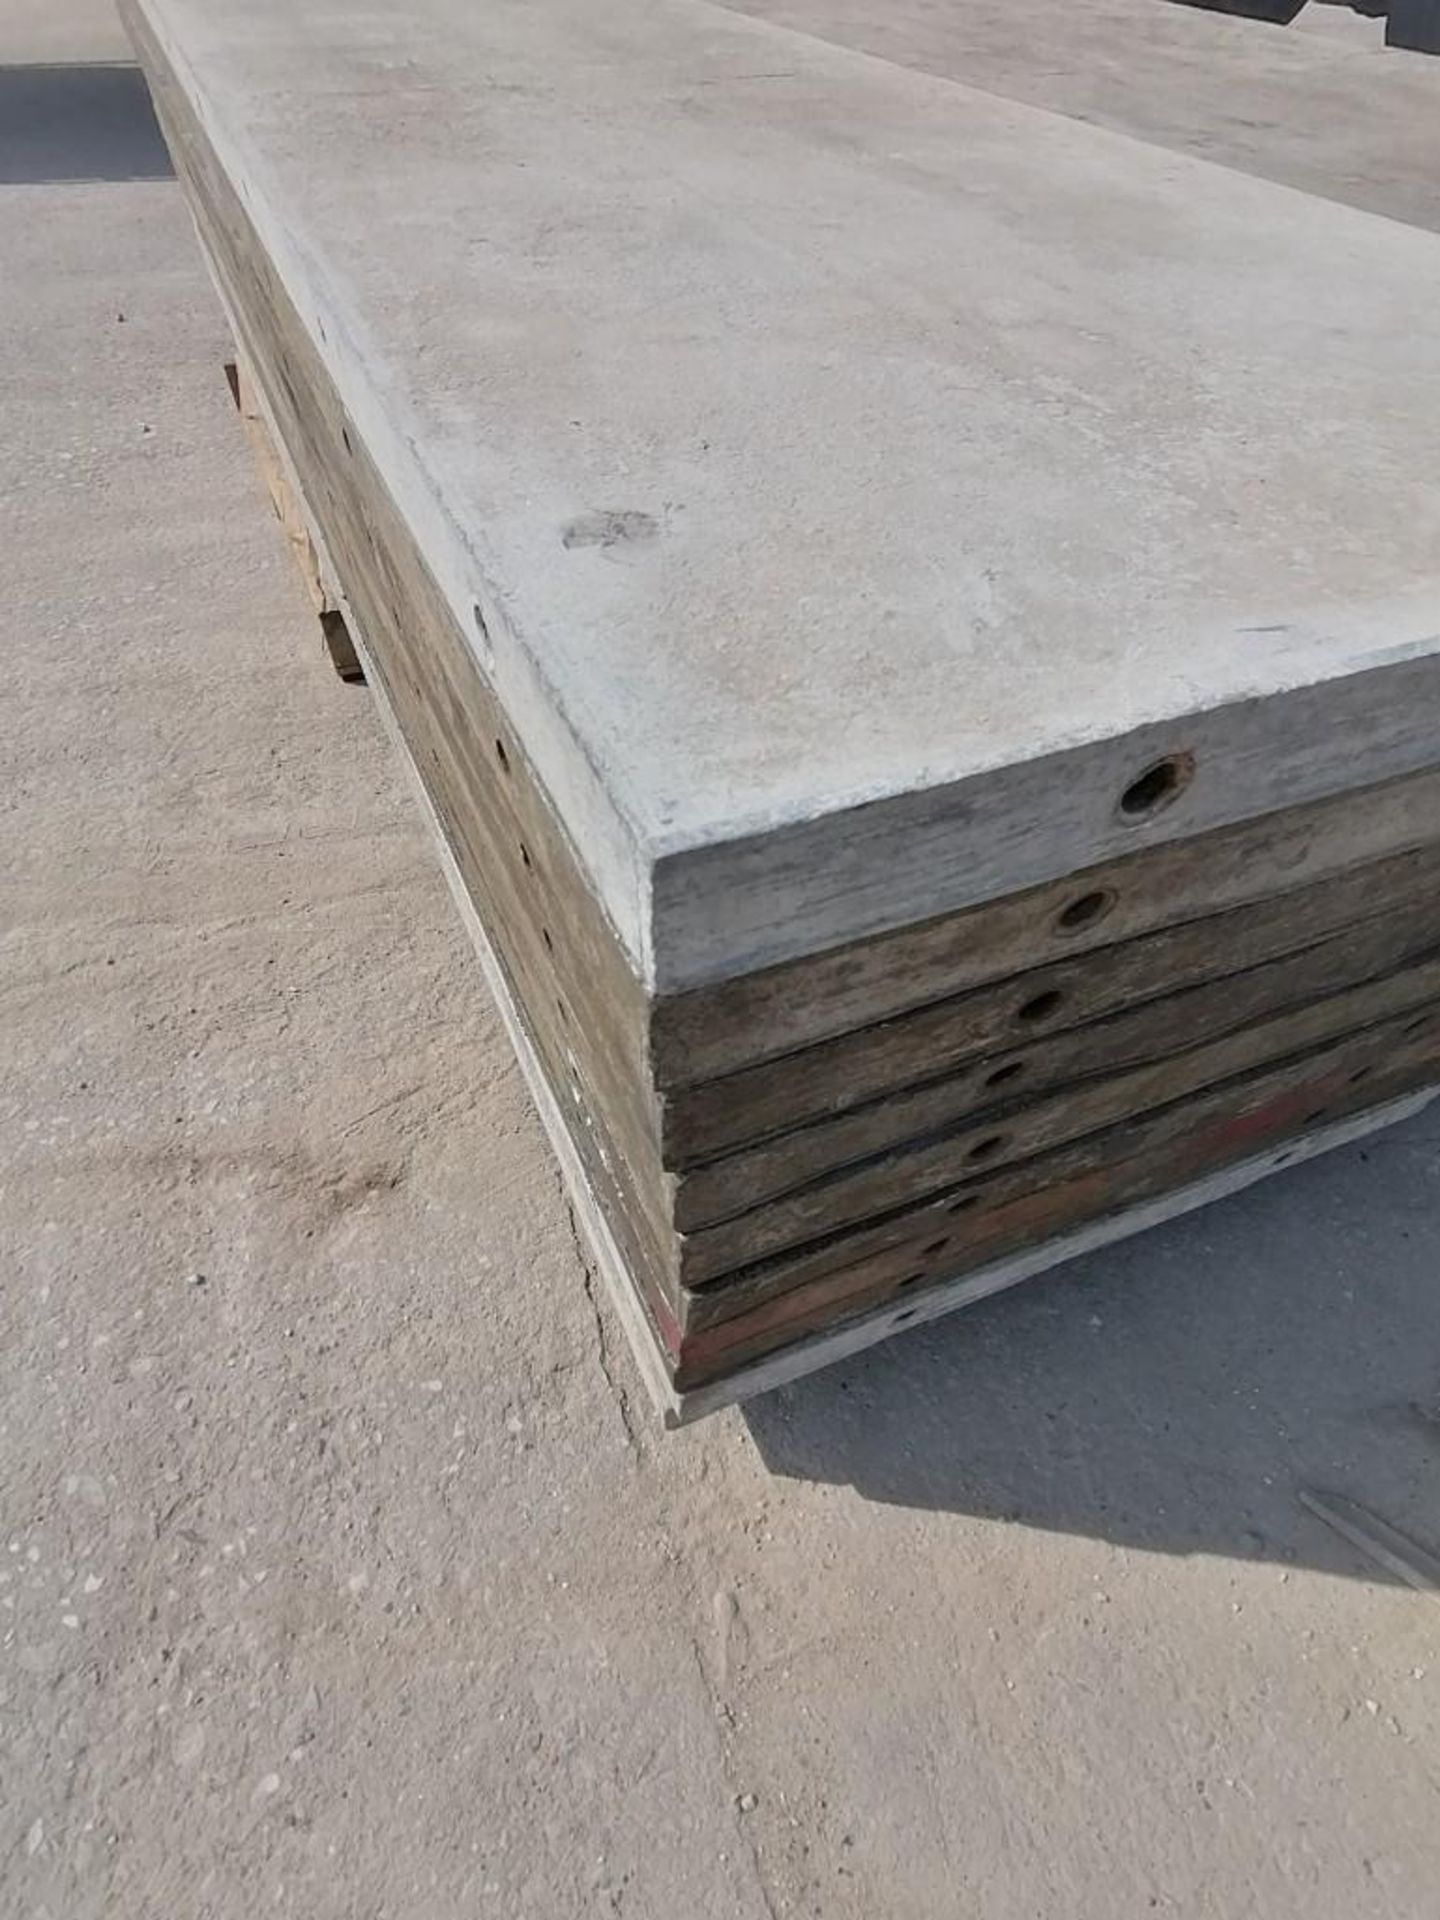 (20) 2' x 9' Laydowns Wall-Ties Smooth Aluminum Concrete Forms 6-12 Hole Pattern. Located in Mt. - Image 7 of 9